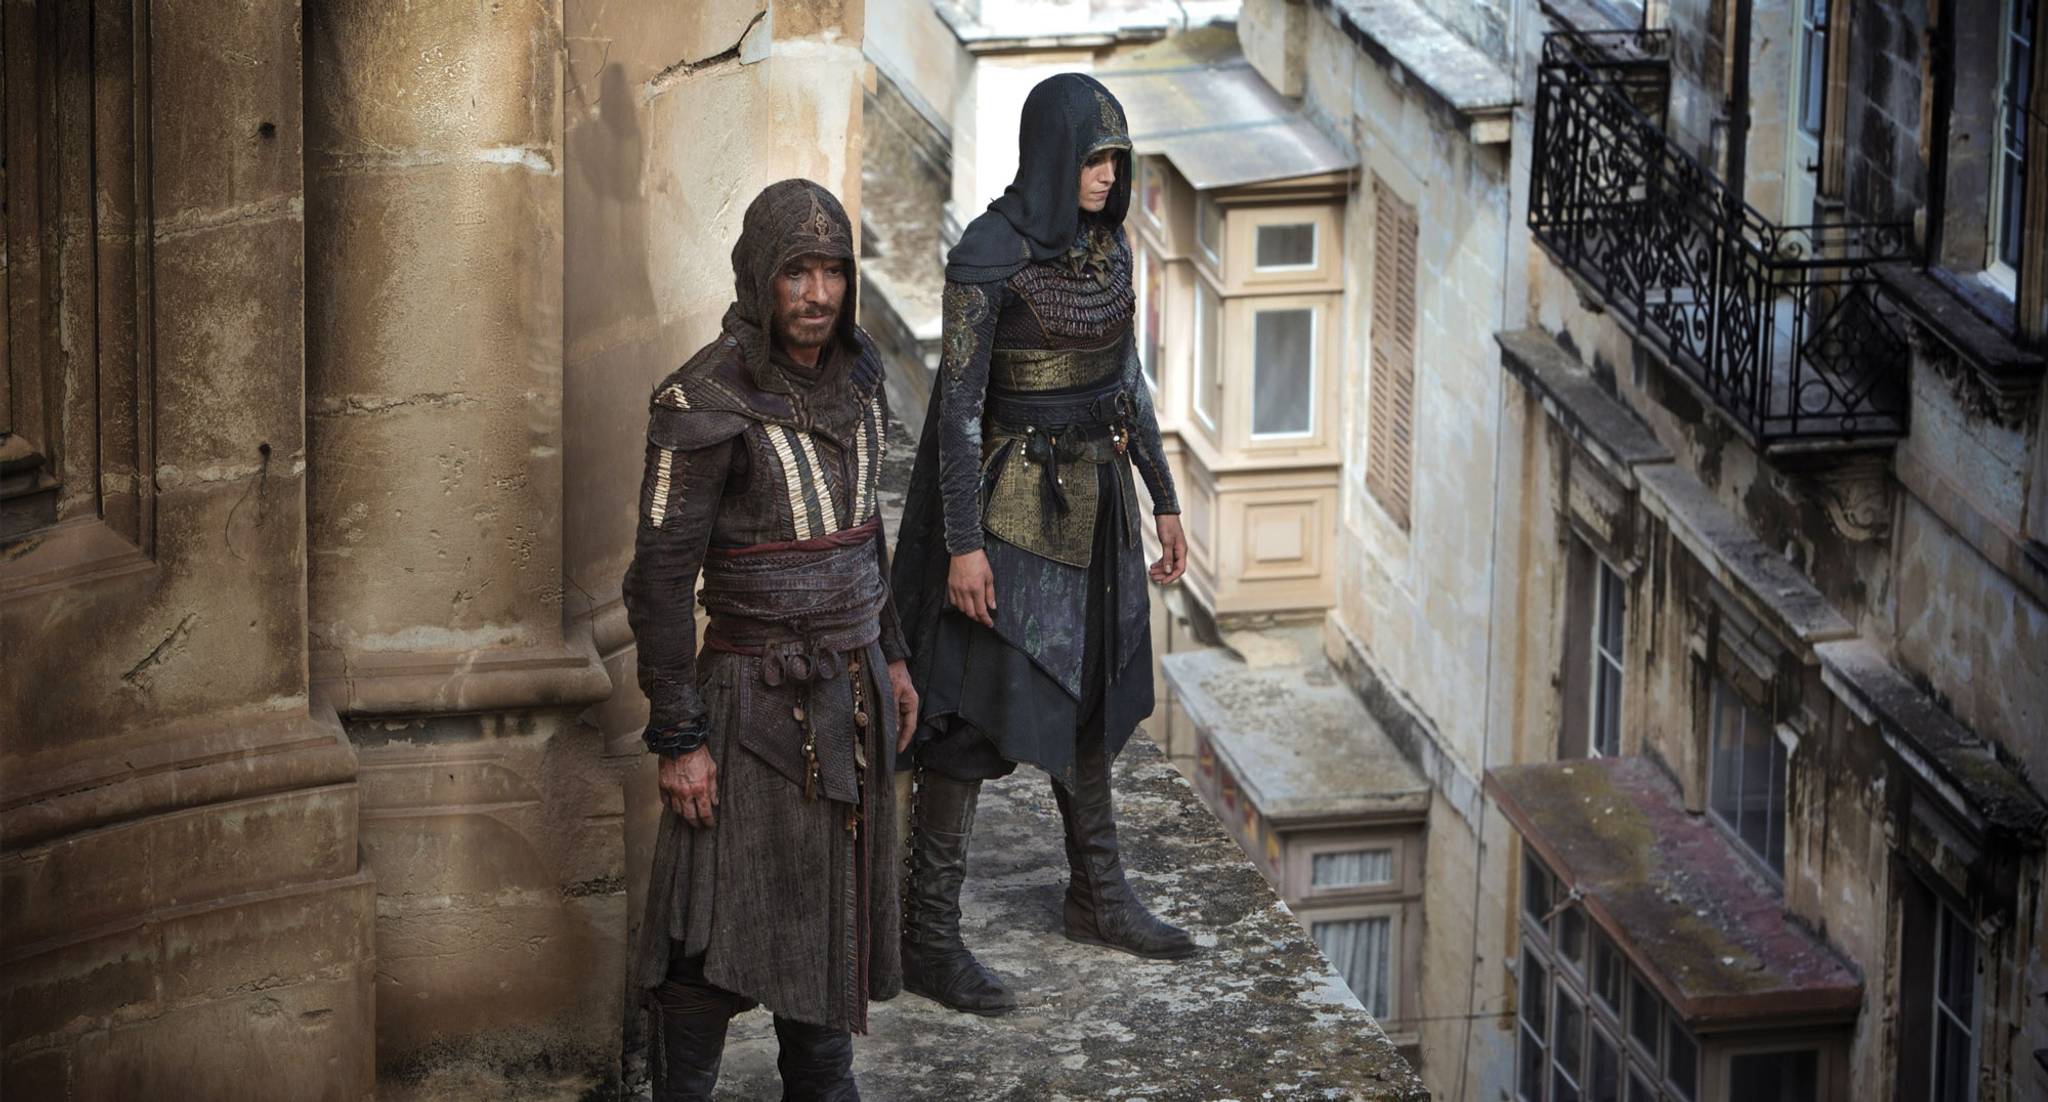 A live stunt was aired as an ad for Assassin’s Creed